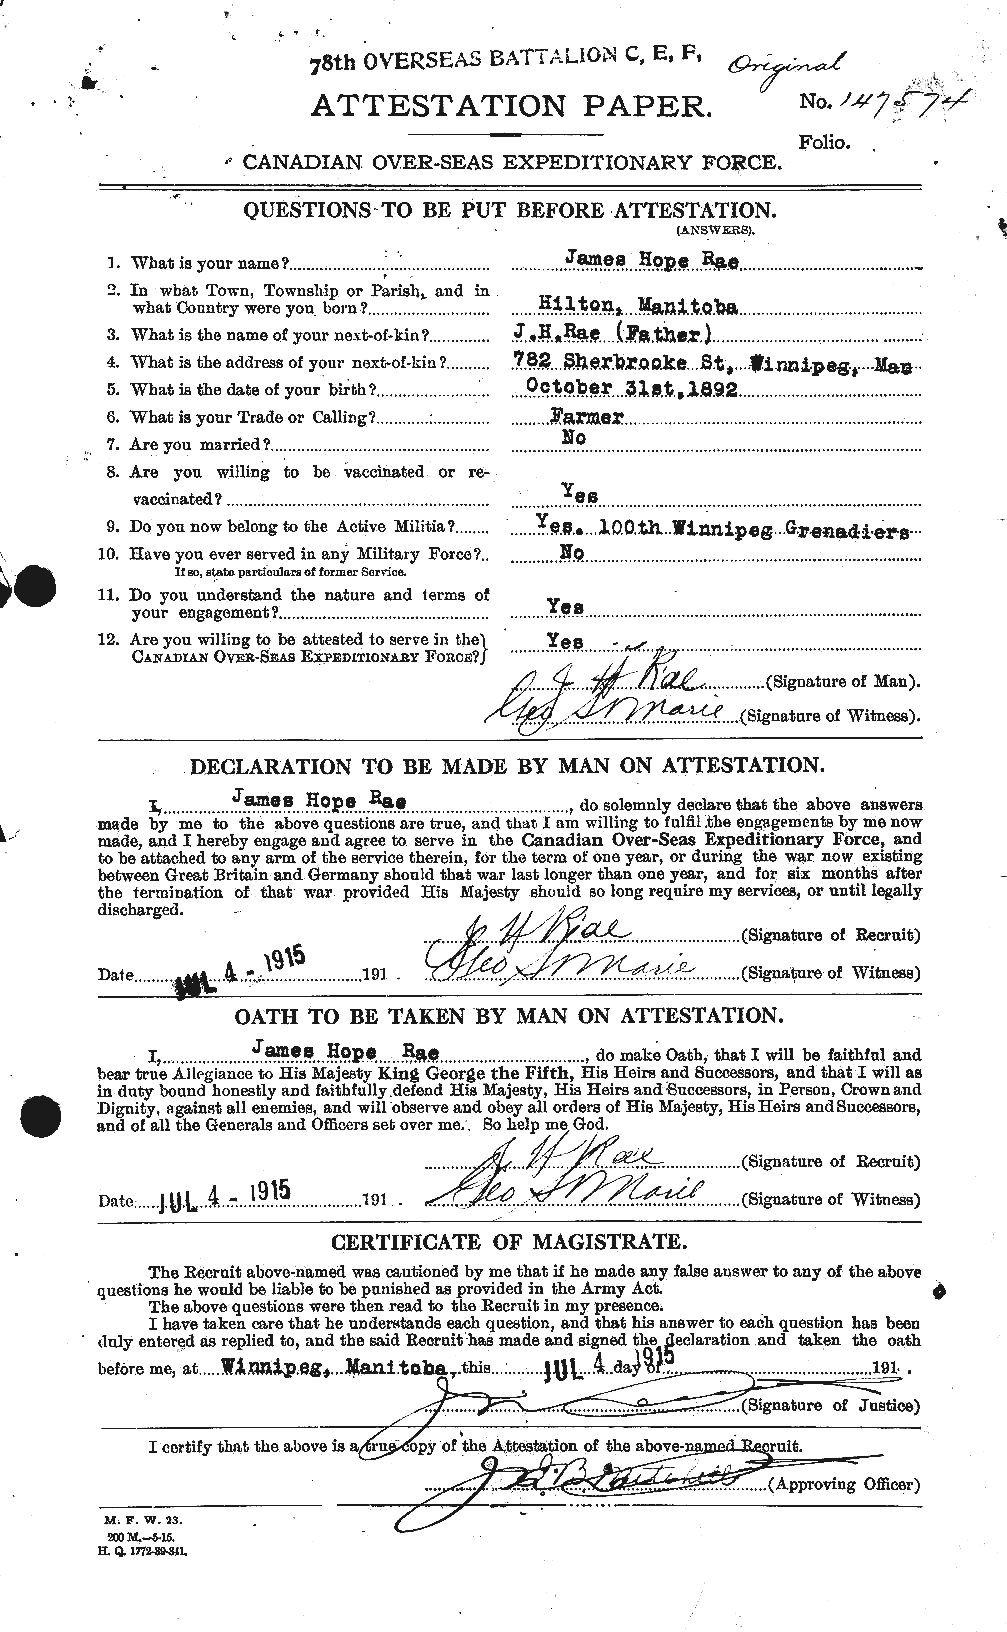 Personnel Records of the First World War - CEF 591244a